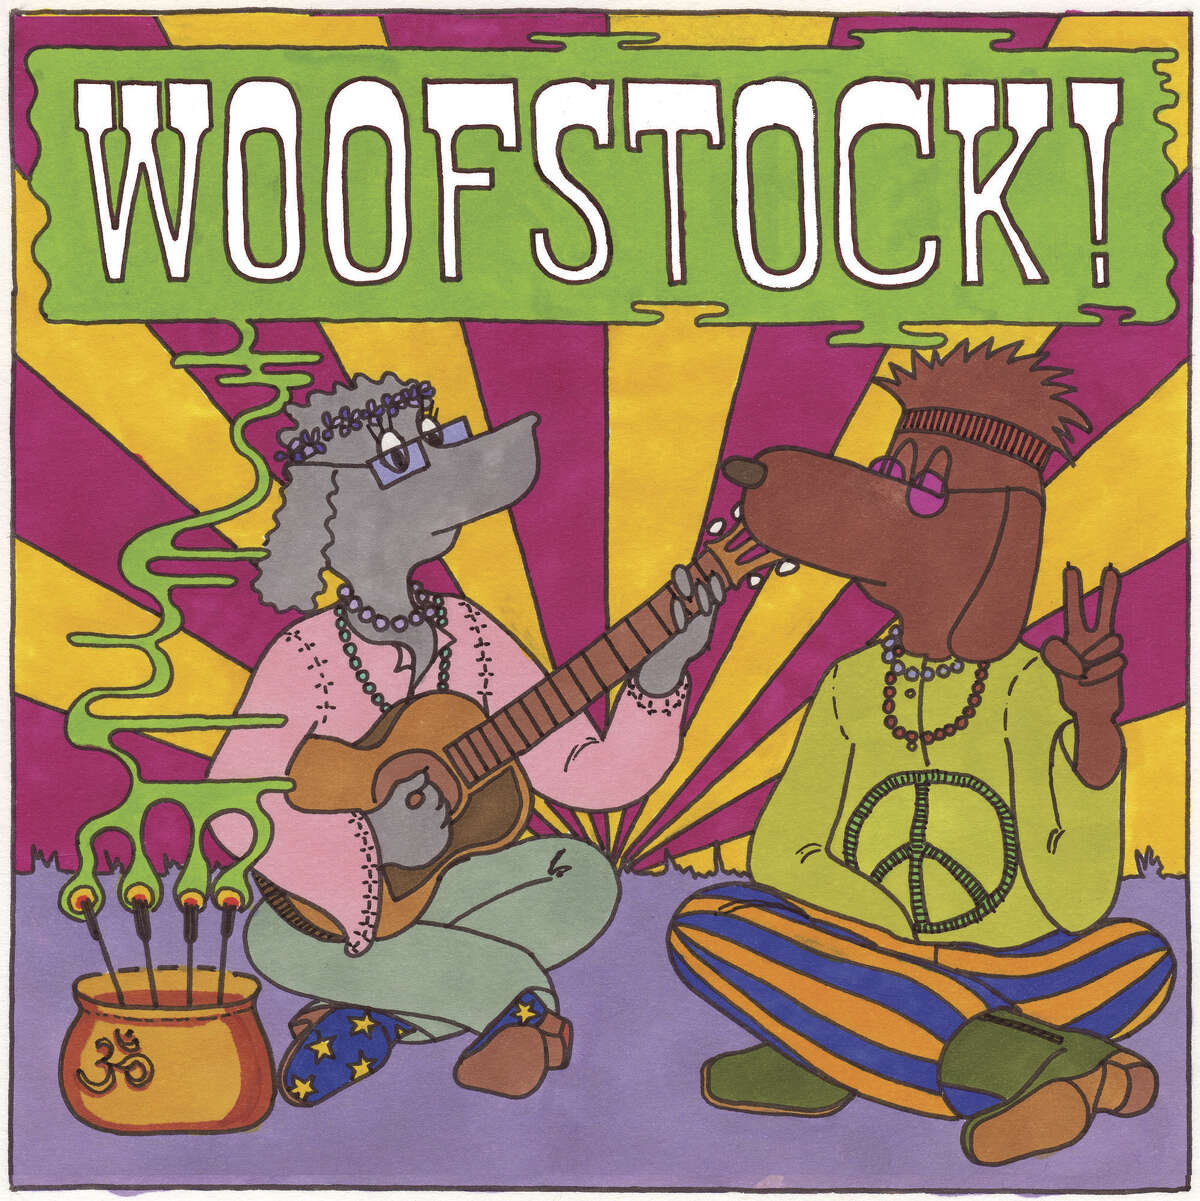 Columbia County Habitat will present Woofstock!, a groovy day-long event on Saturday, June 18th for dogs and dog lovers that will include mellow versions of traditional dog show events, a dog parade, a 1K run for pooches and their owners and much more, all to benefit Habitat's affordable housing construction programs. Woofstock! will take place from 10 to 4 at Black Raven Farm, 77 Schmidt Road in Ghent.